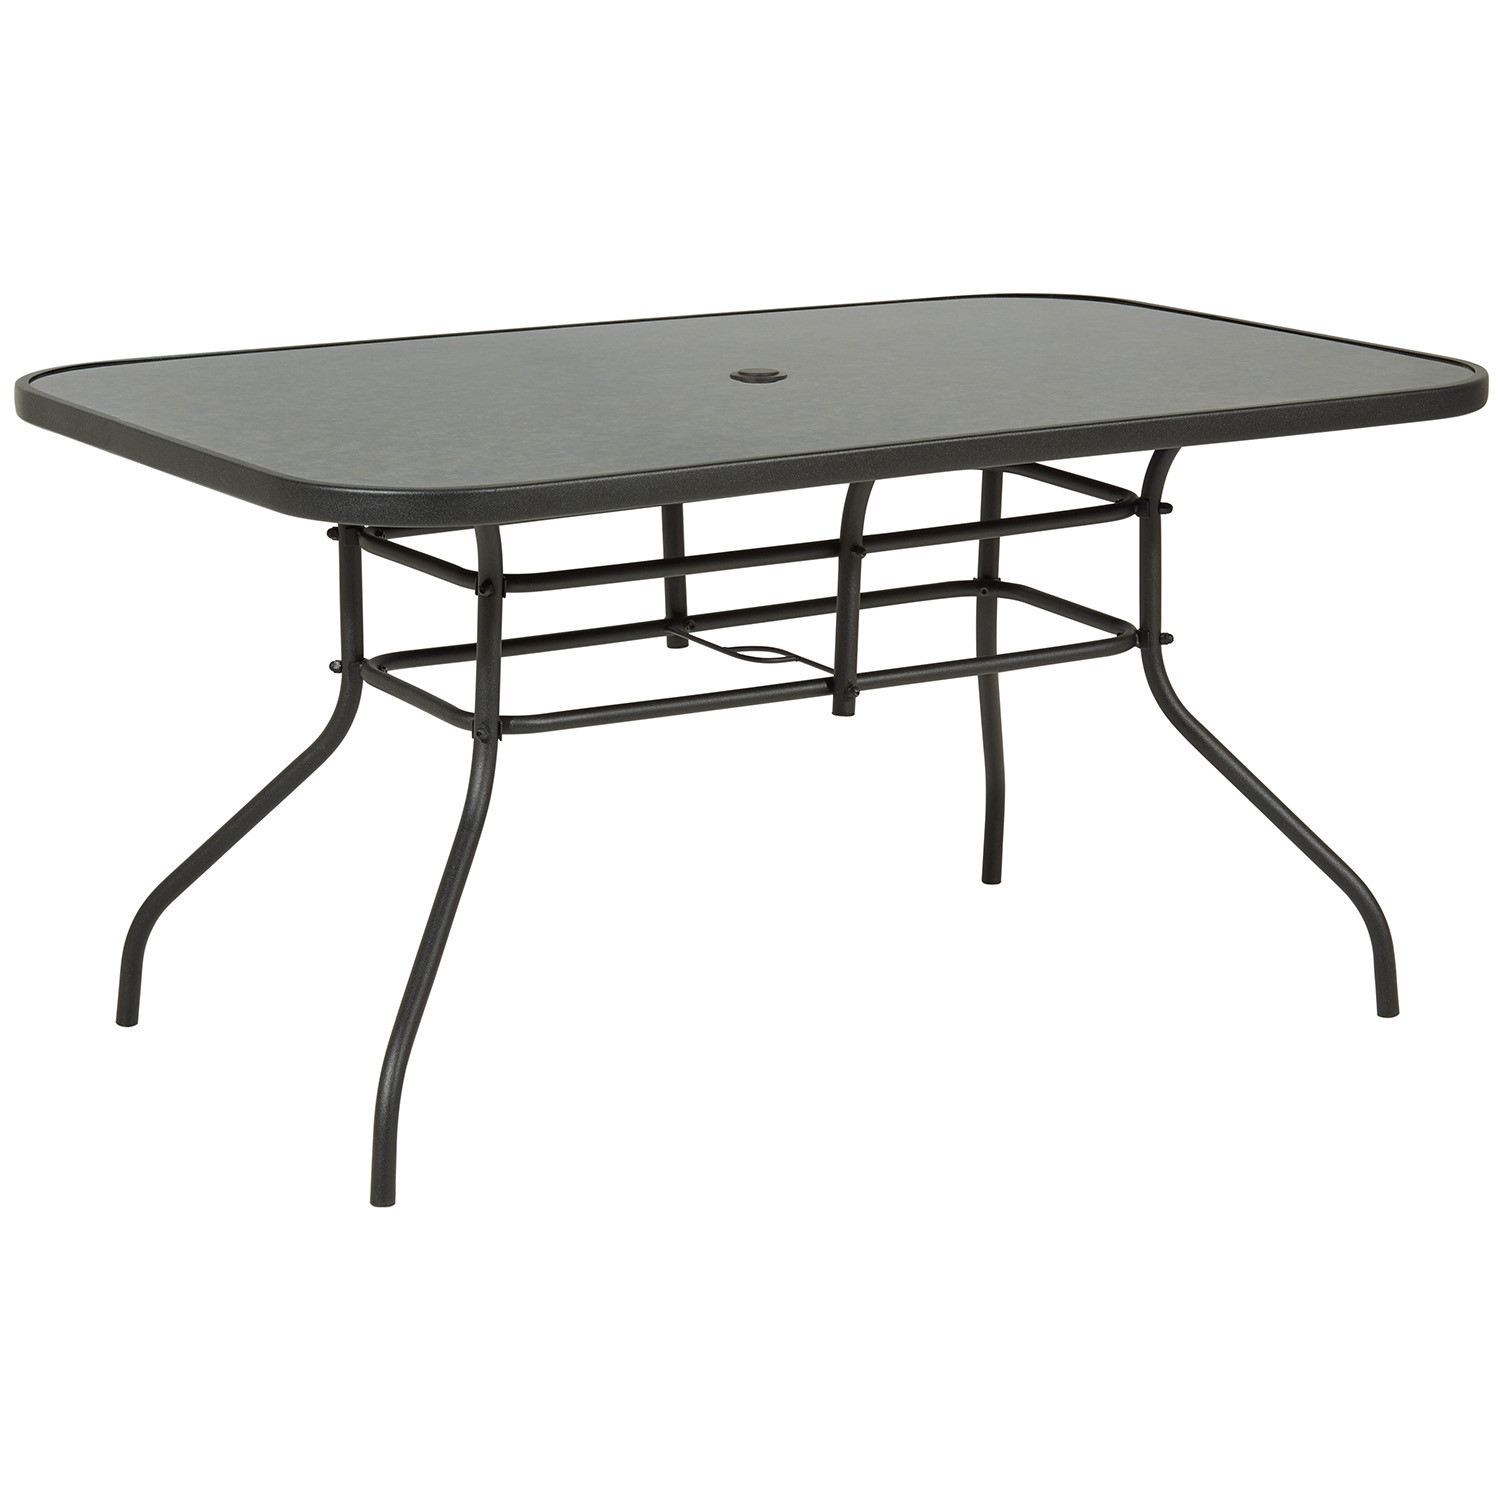 Malay Outdoor Essentials Rio Glass and Steel 6 Seater Large Garden Table Image 2